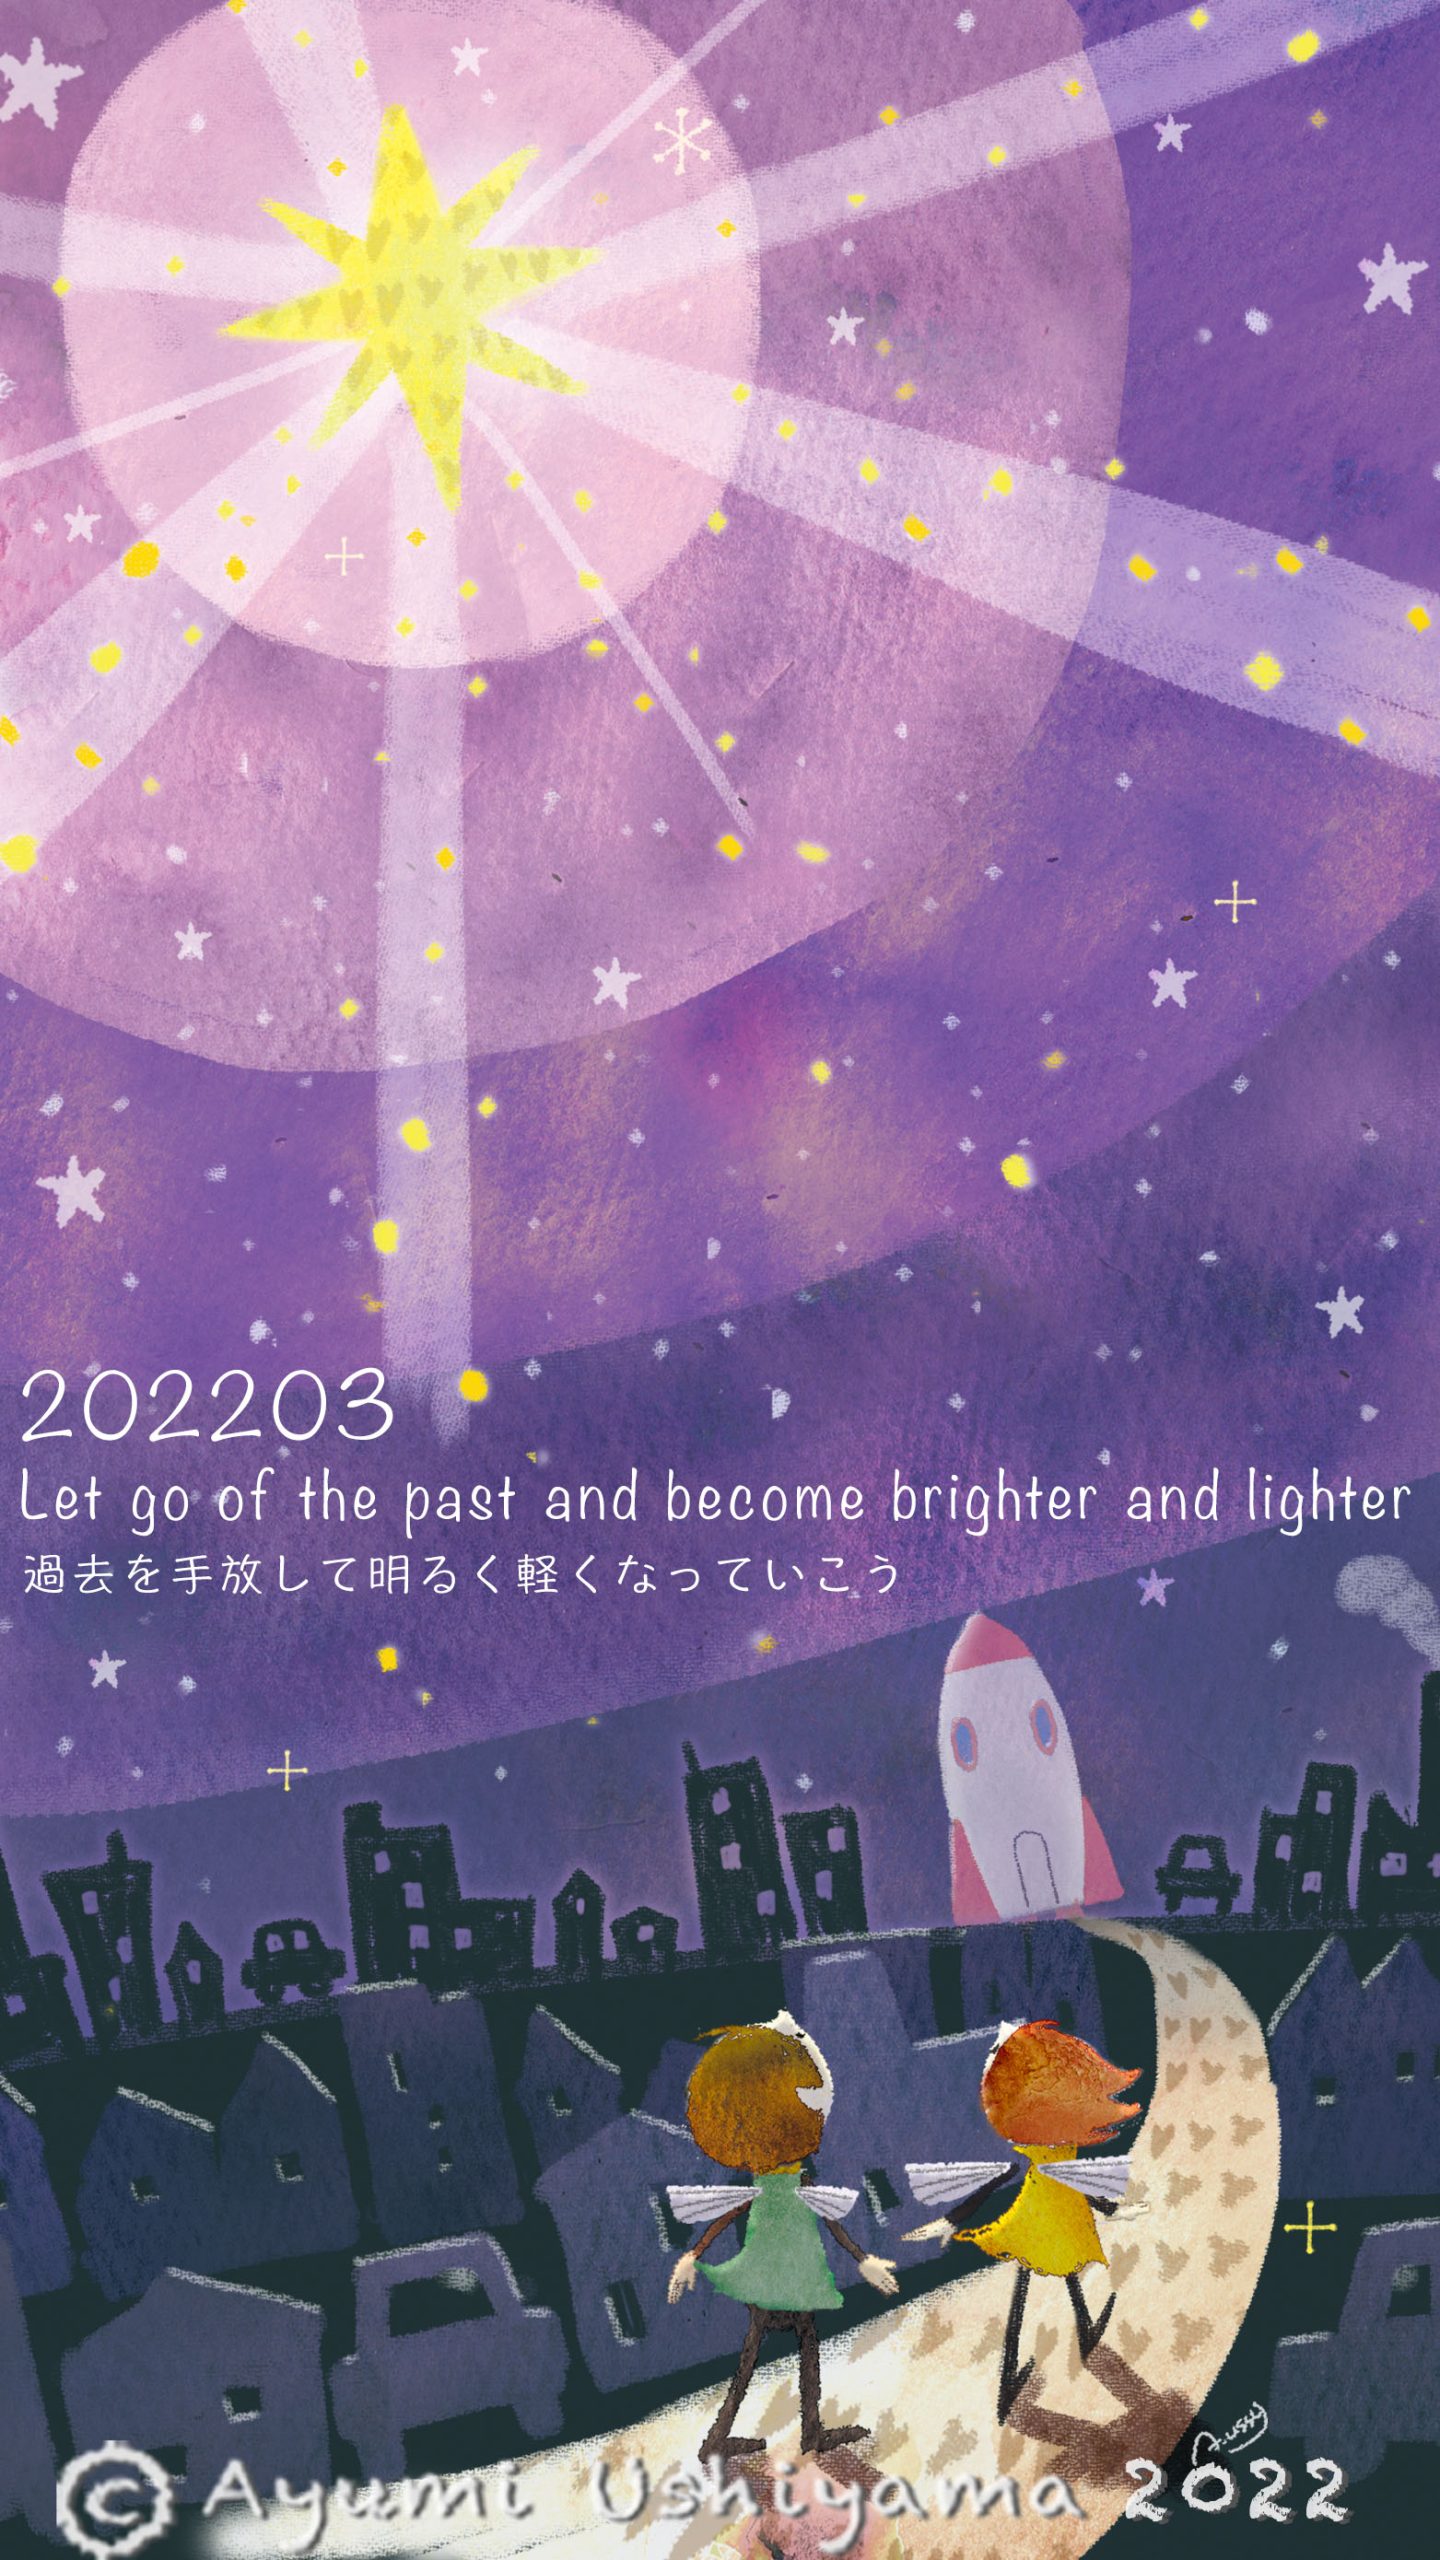 2022.03『Let go of the past and become brighter and lighter』